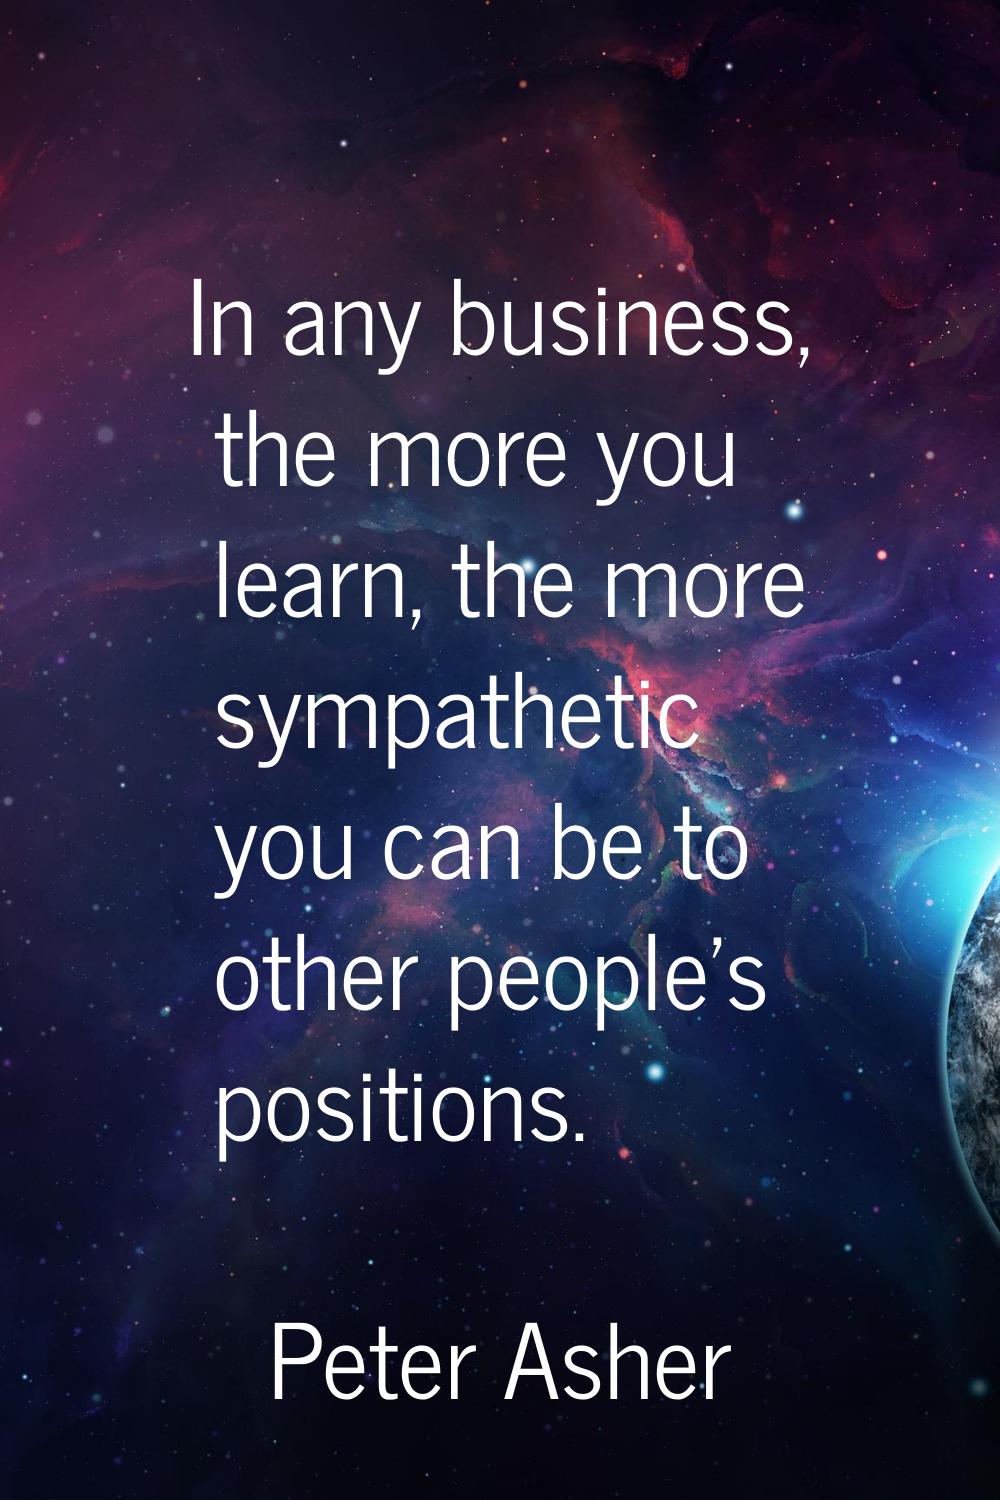 In any business, the more you learn, the more sympathetic you can be to other people's positions.